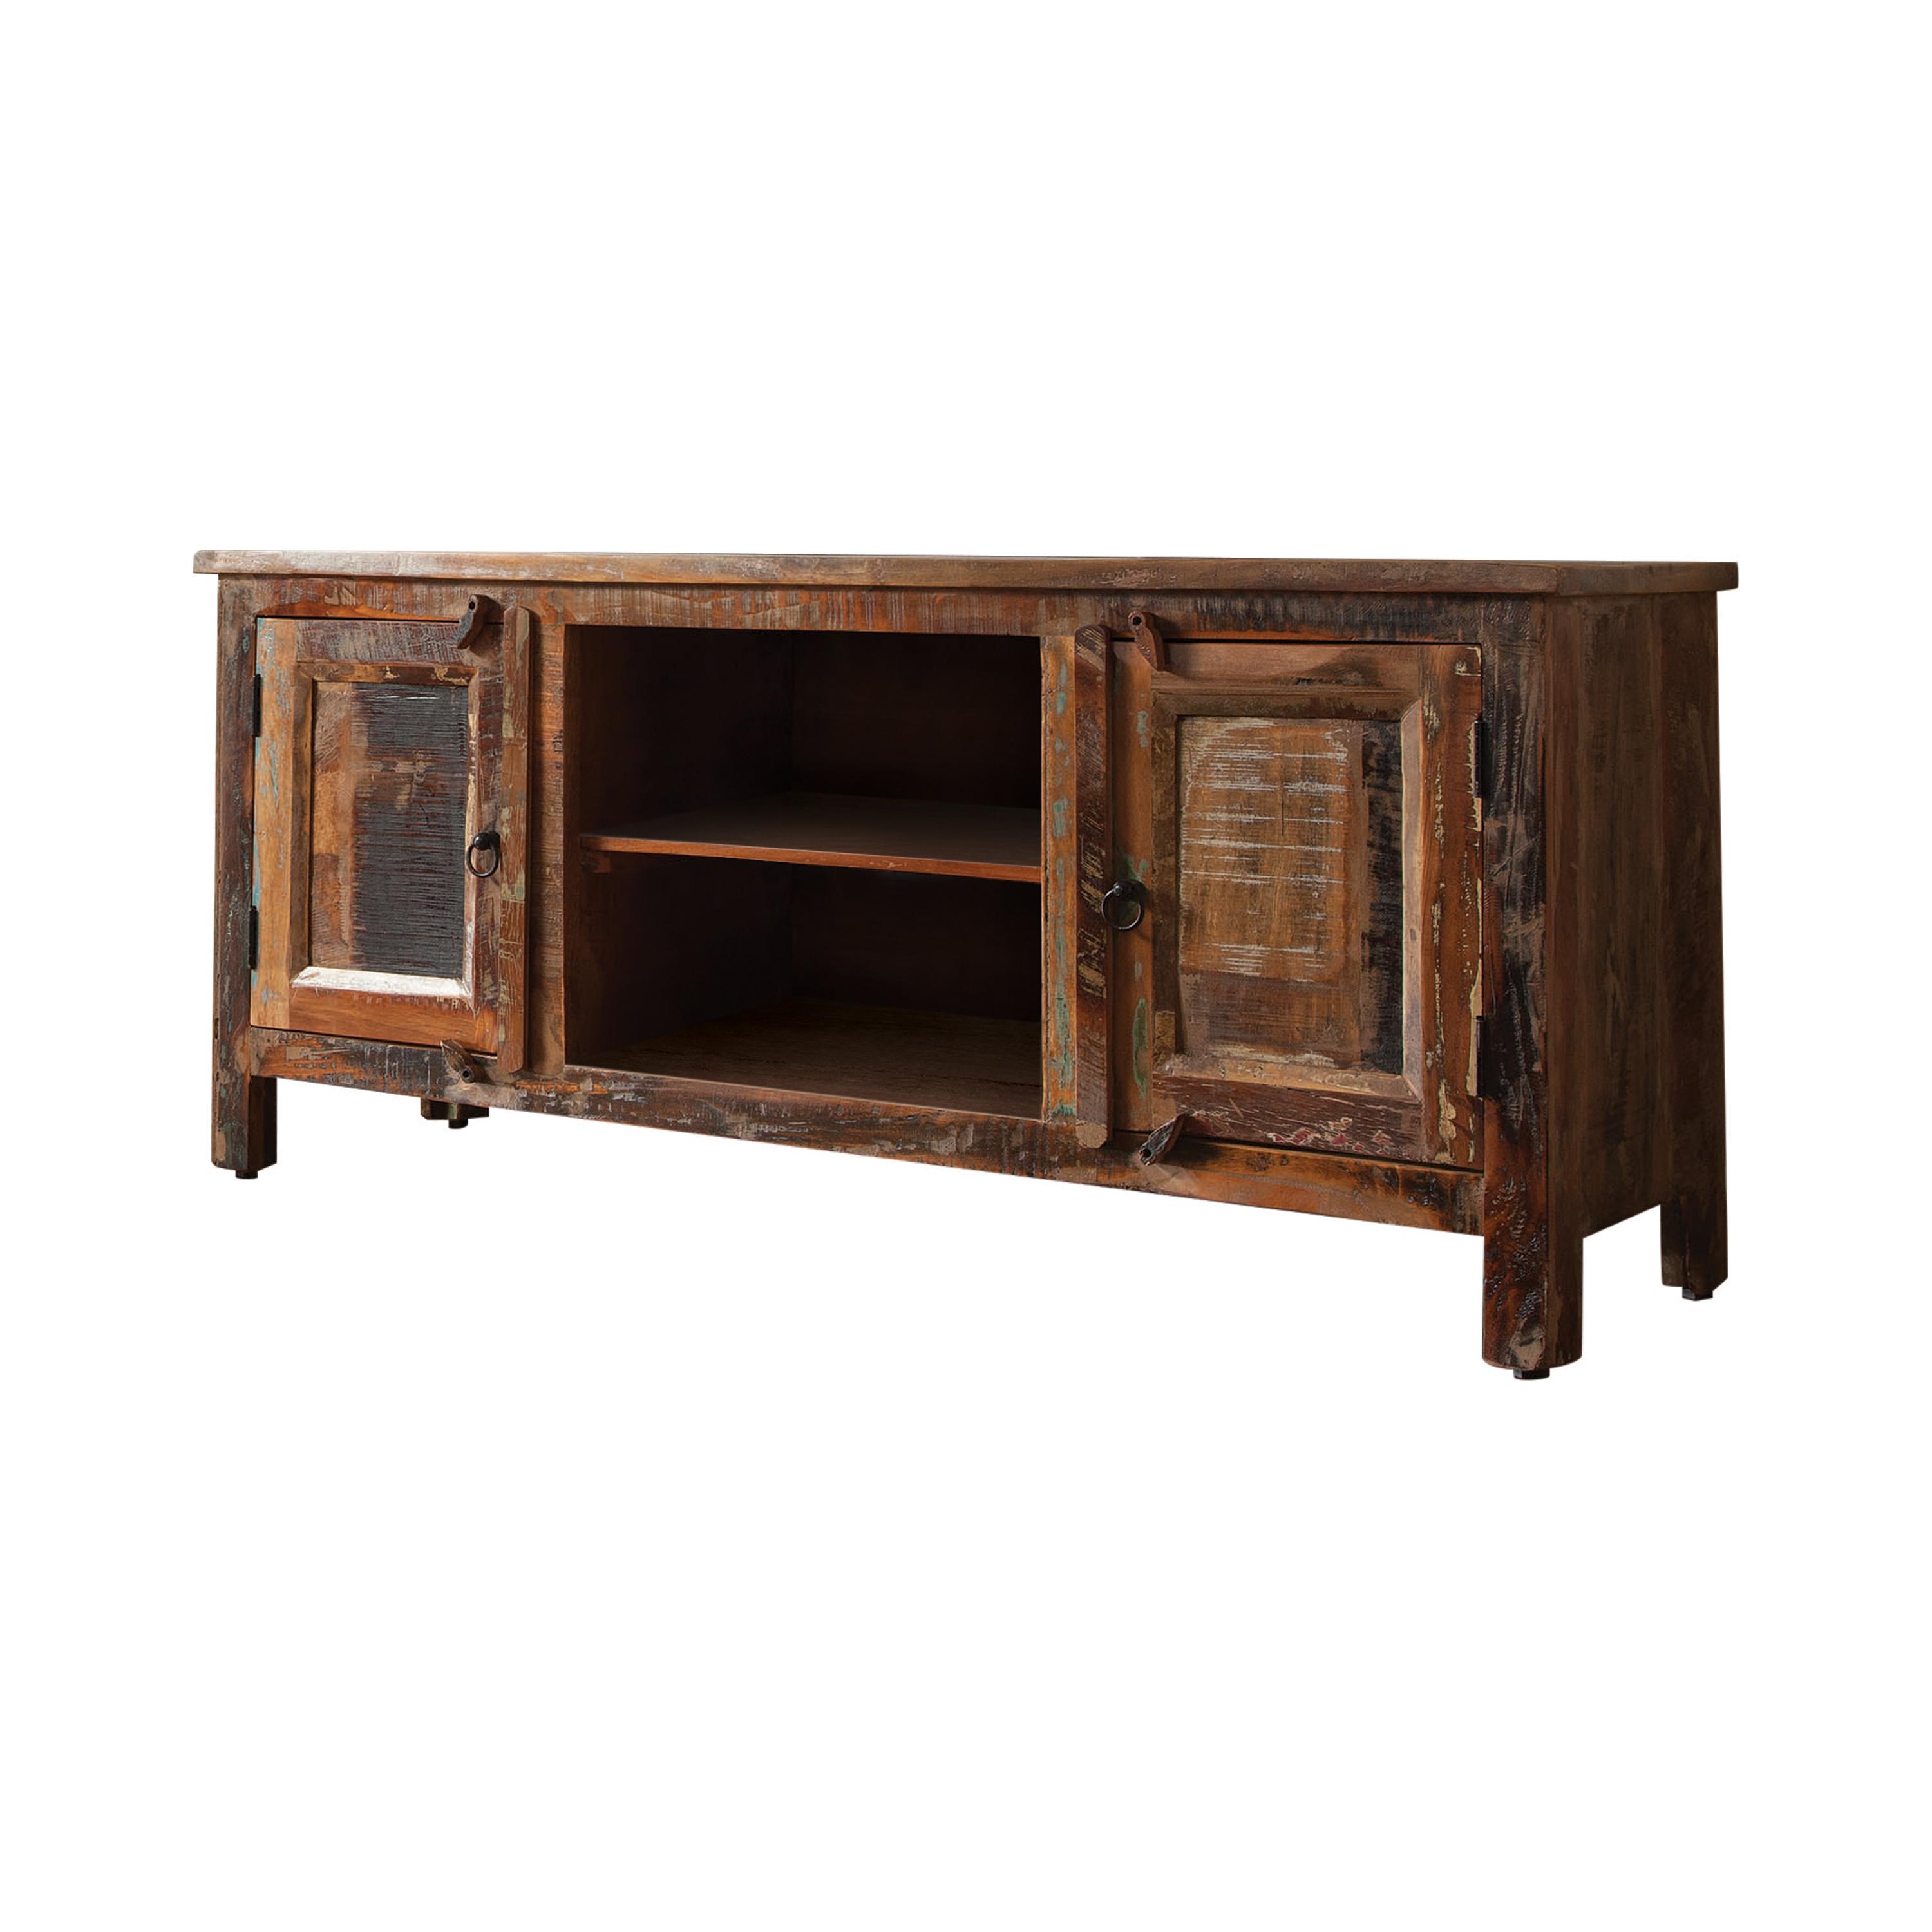 Rustic Tv Console 700303 700303 in Brown 